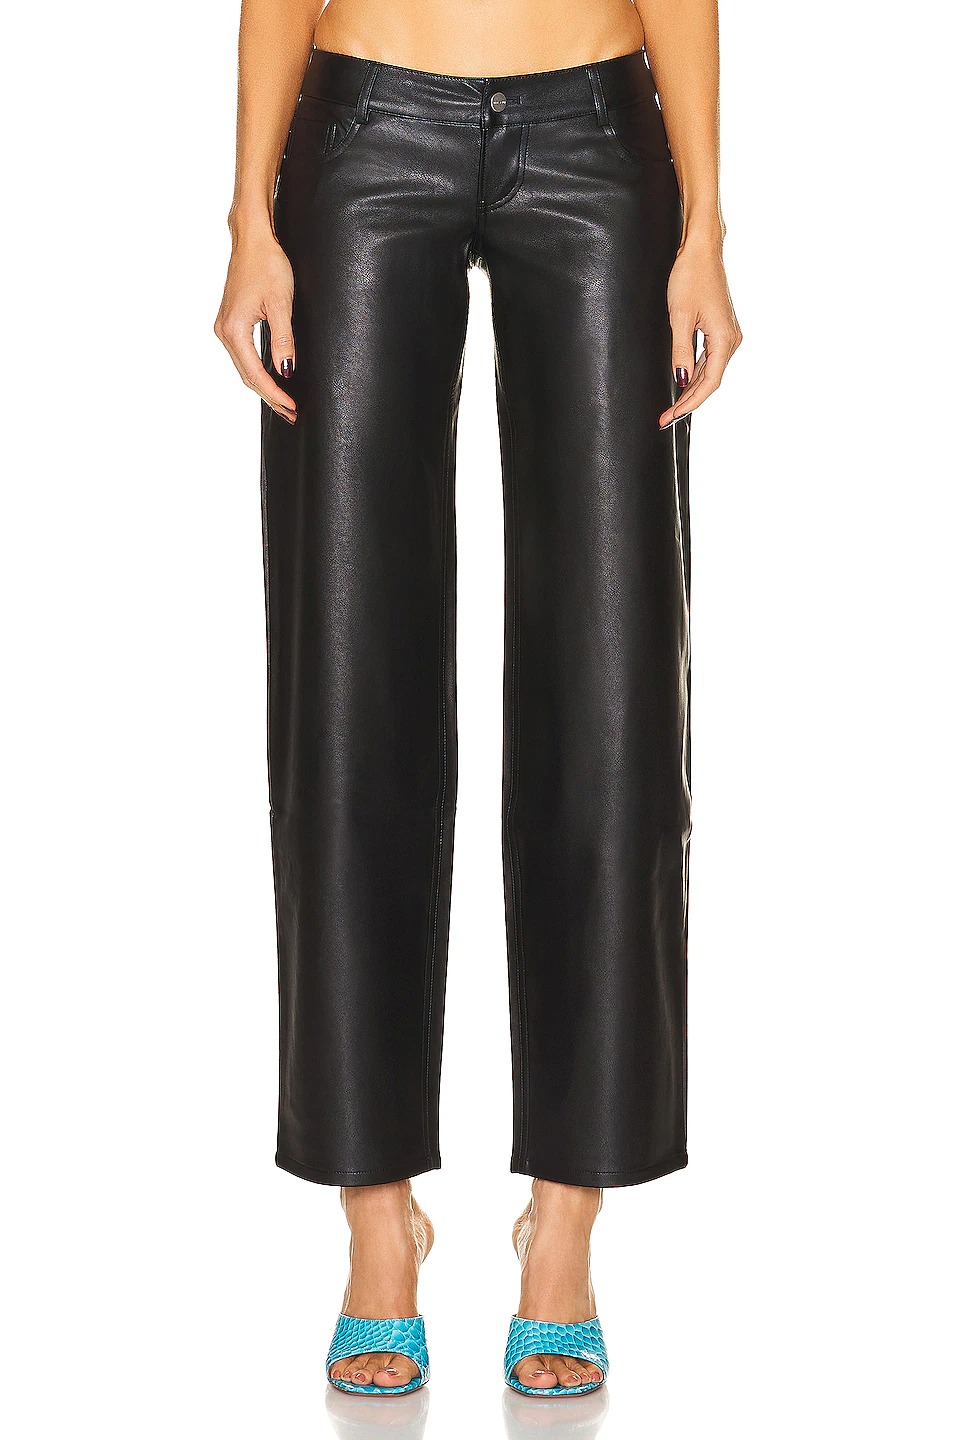 The 23 Best Faux Leather Pants That Are Trending Now | Who What Wear